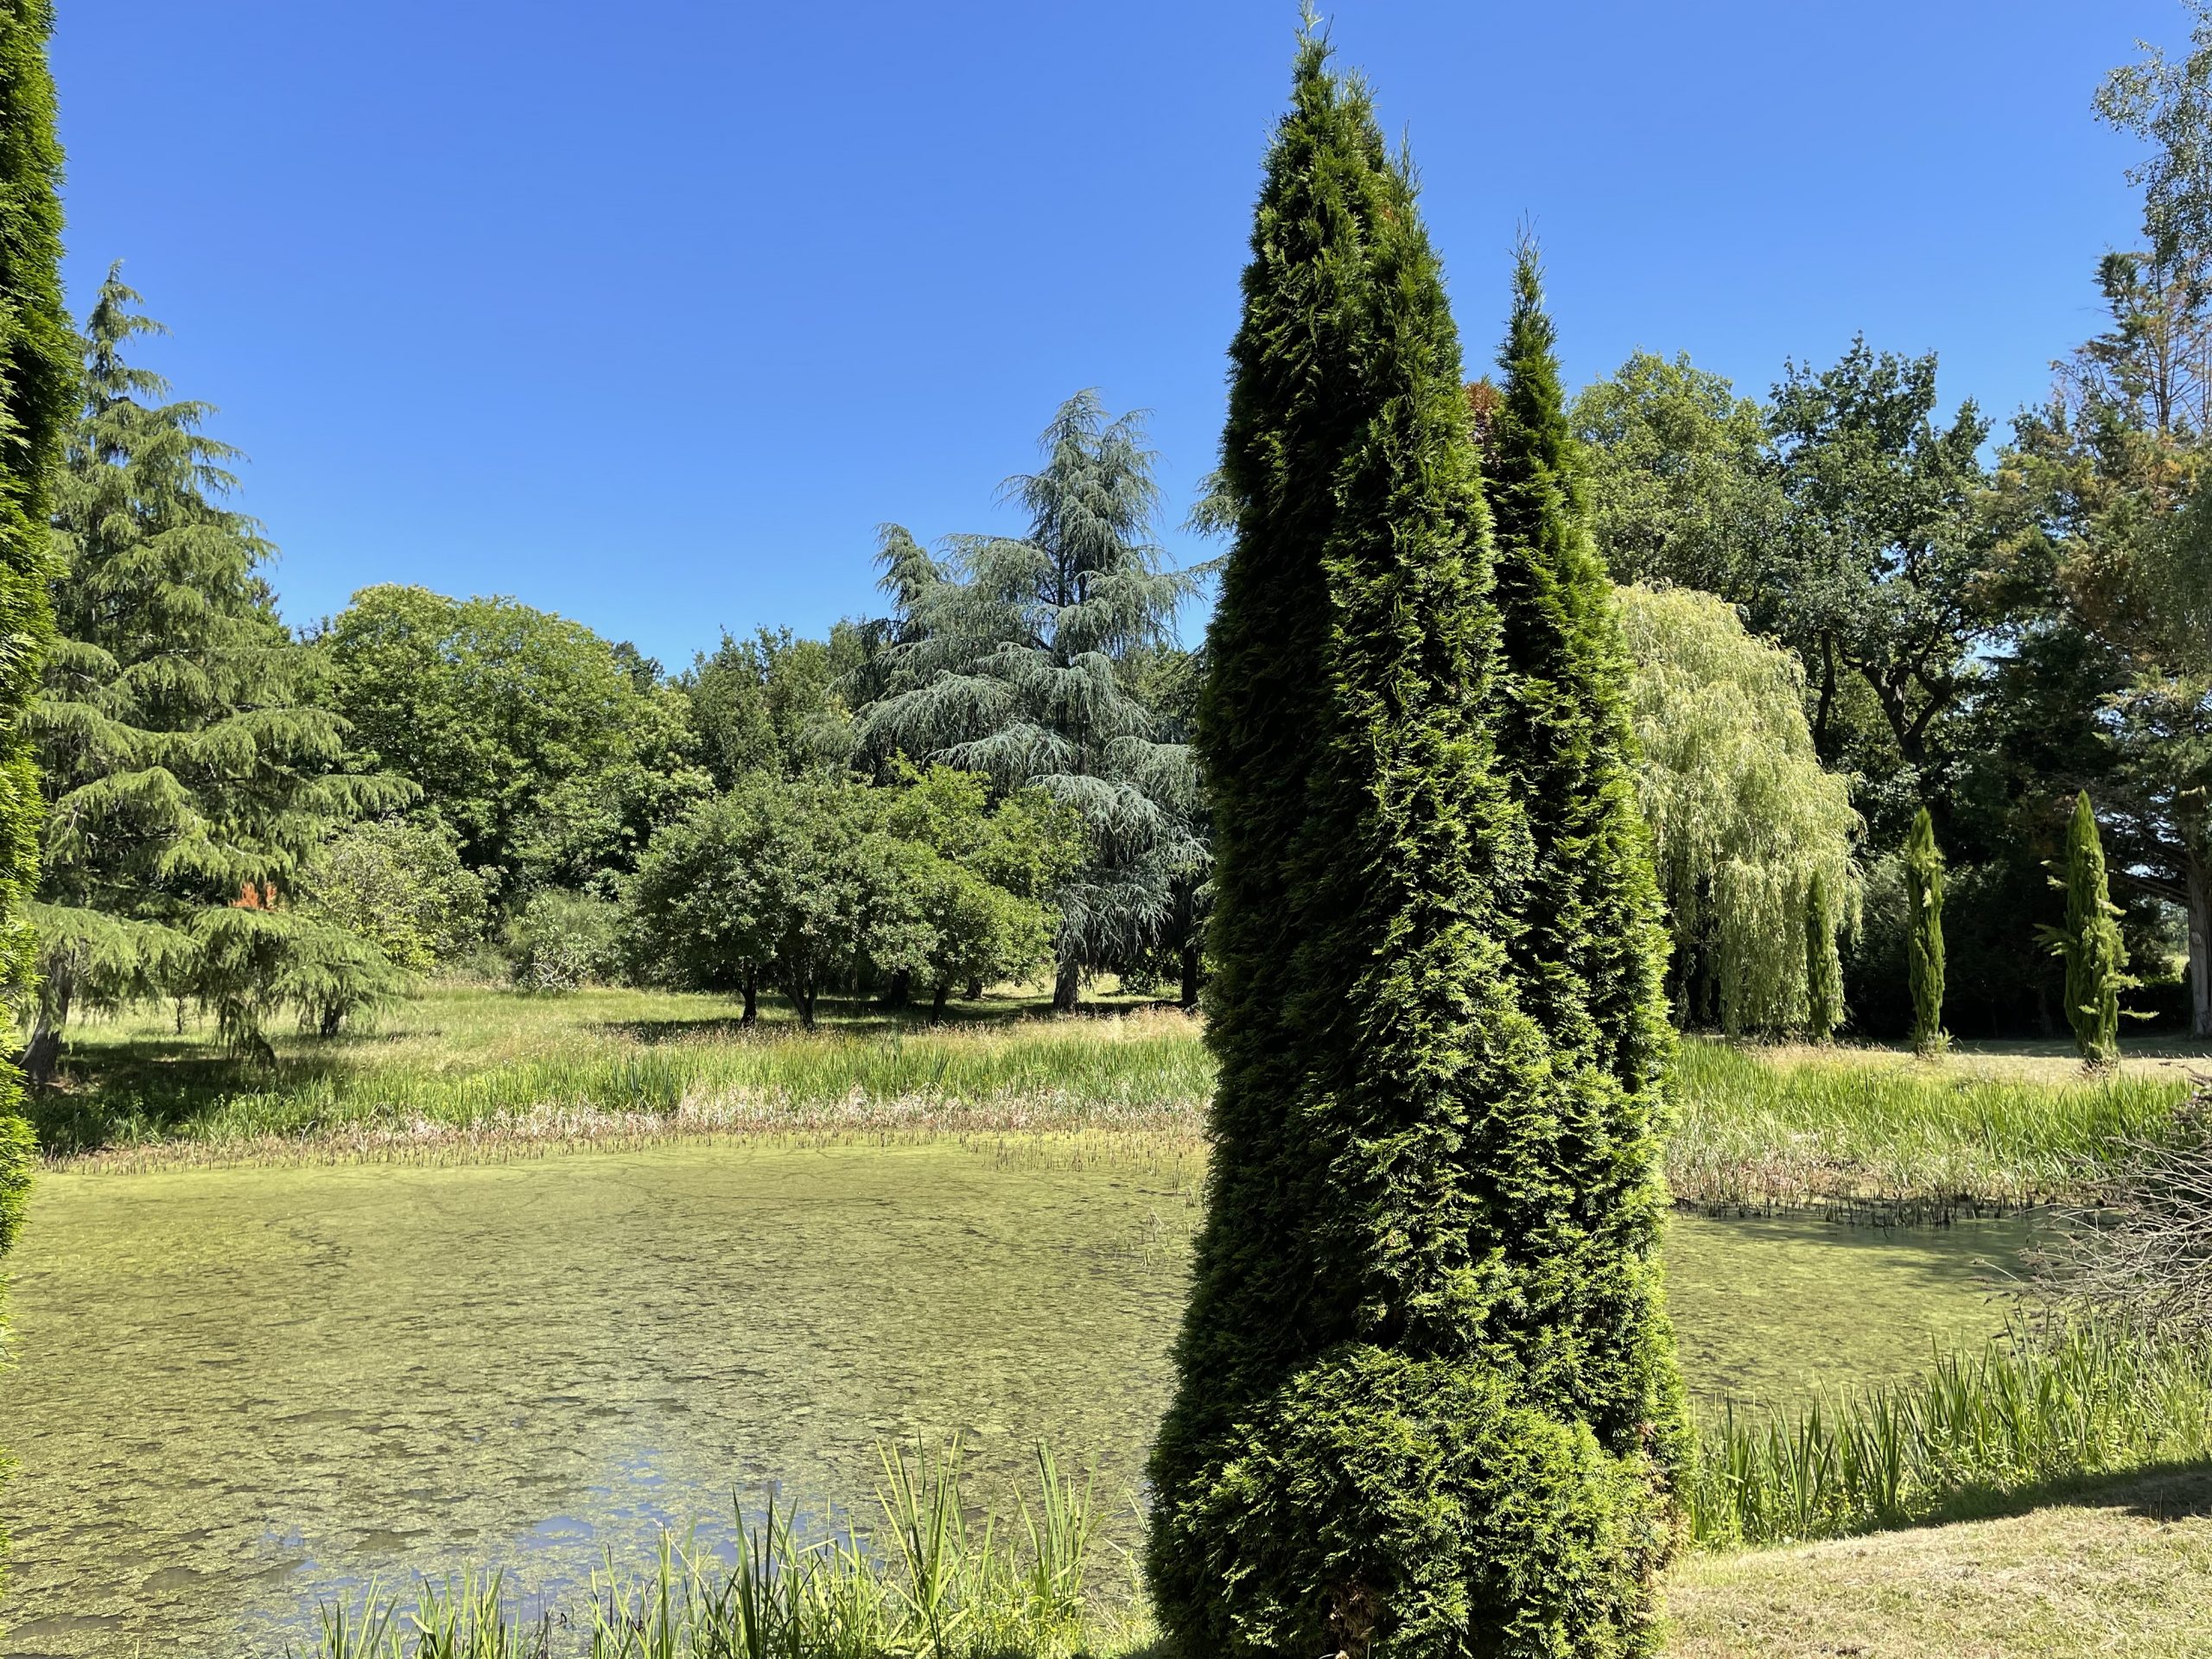 16th century property located 30 minutes from Angers-245m2- 1 hectare with pond.